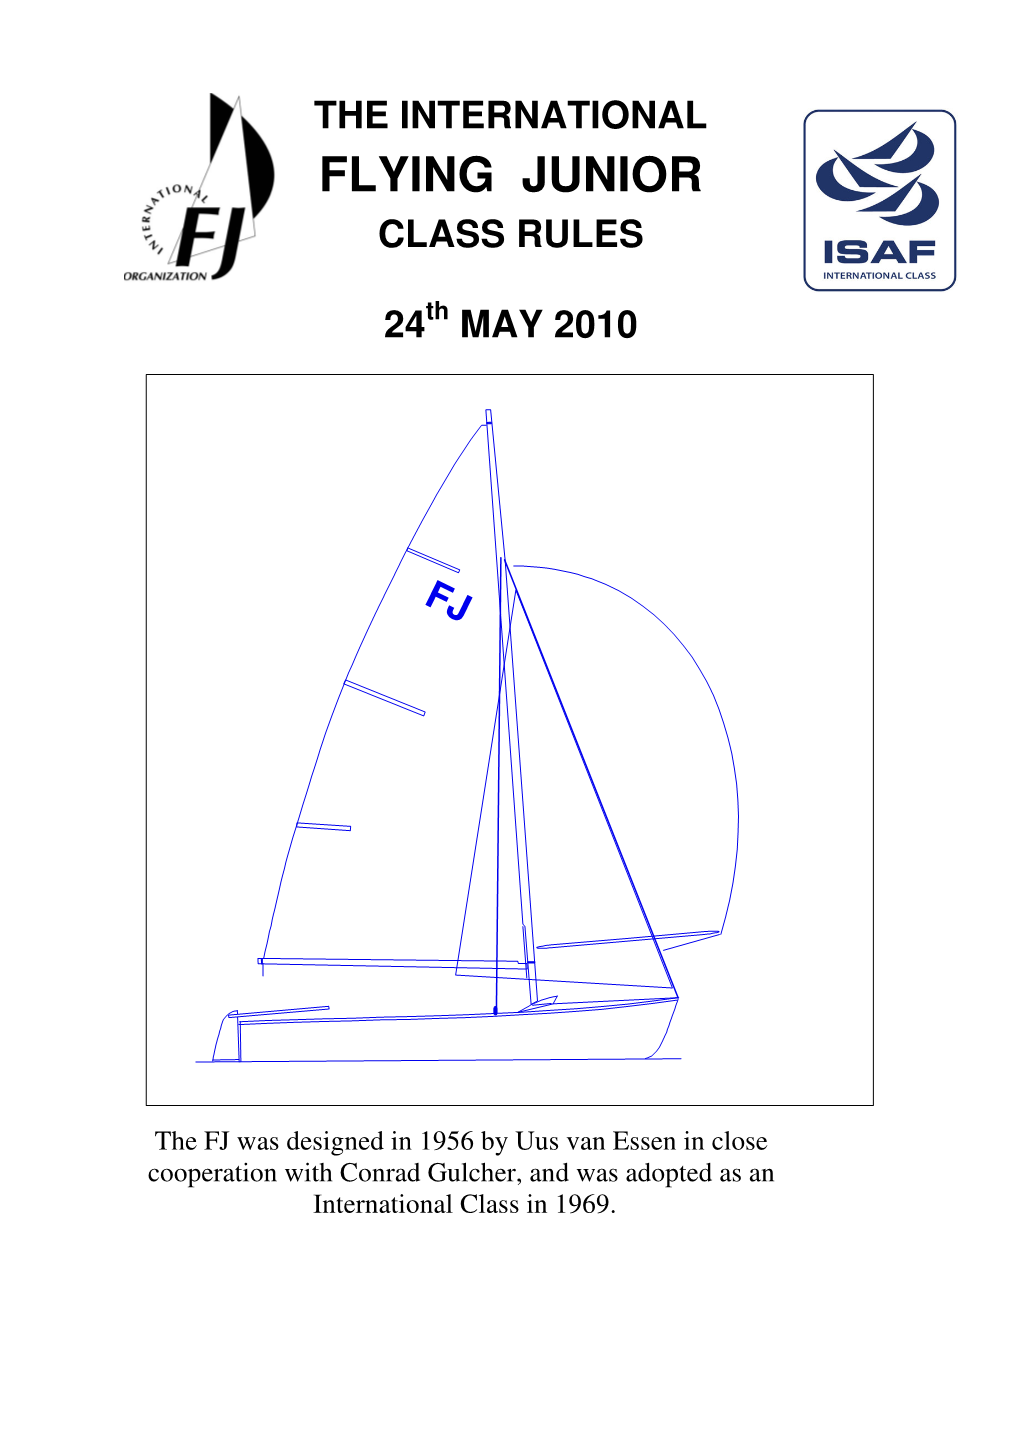 The International Flying Junior Class Rules 2010